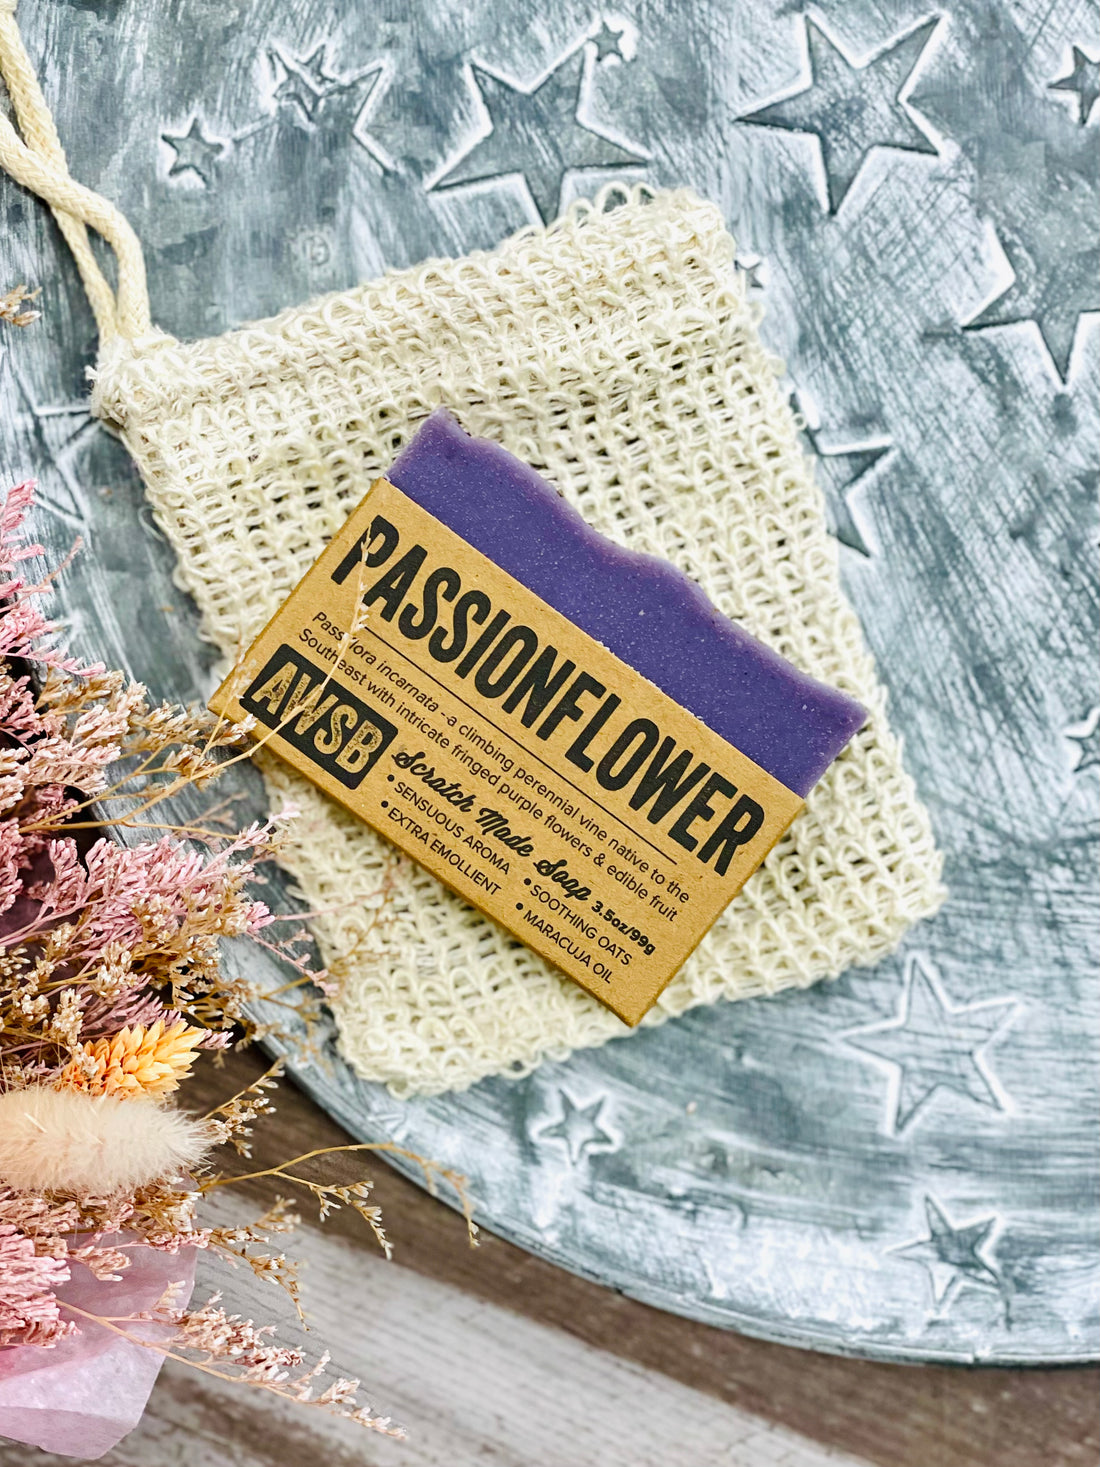 Passionflower Soap